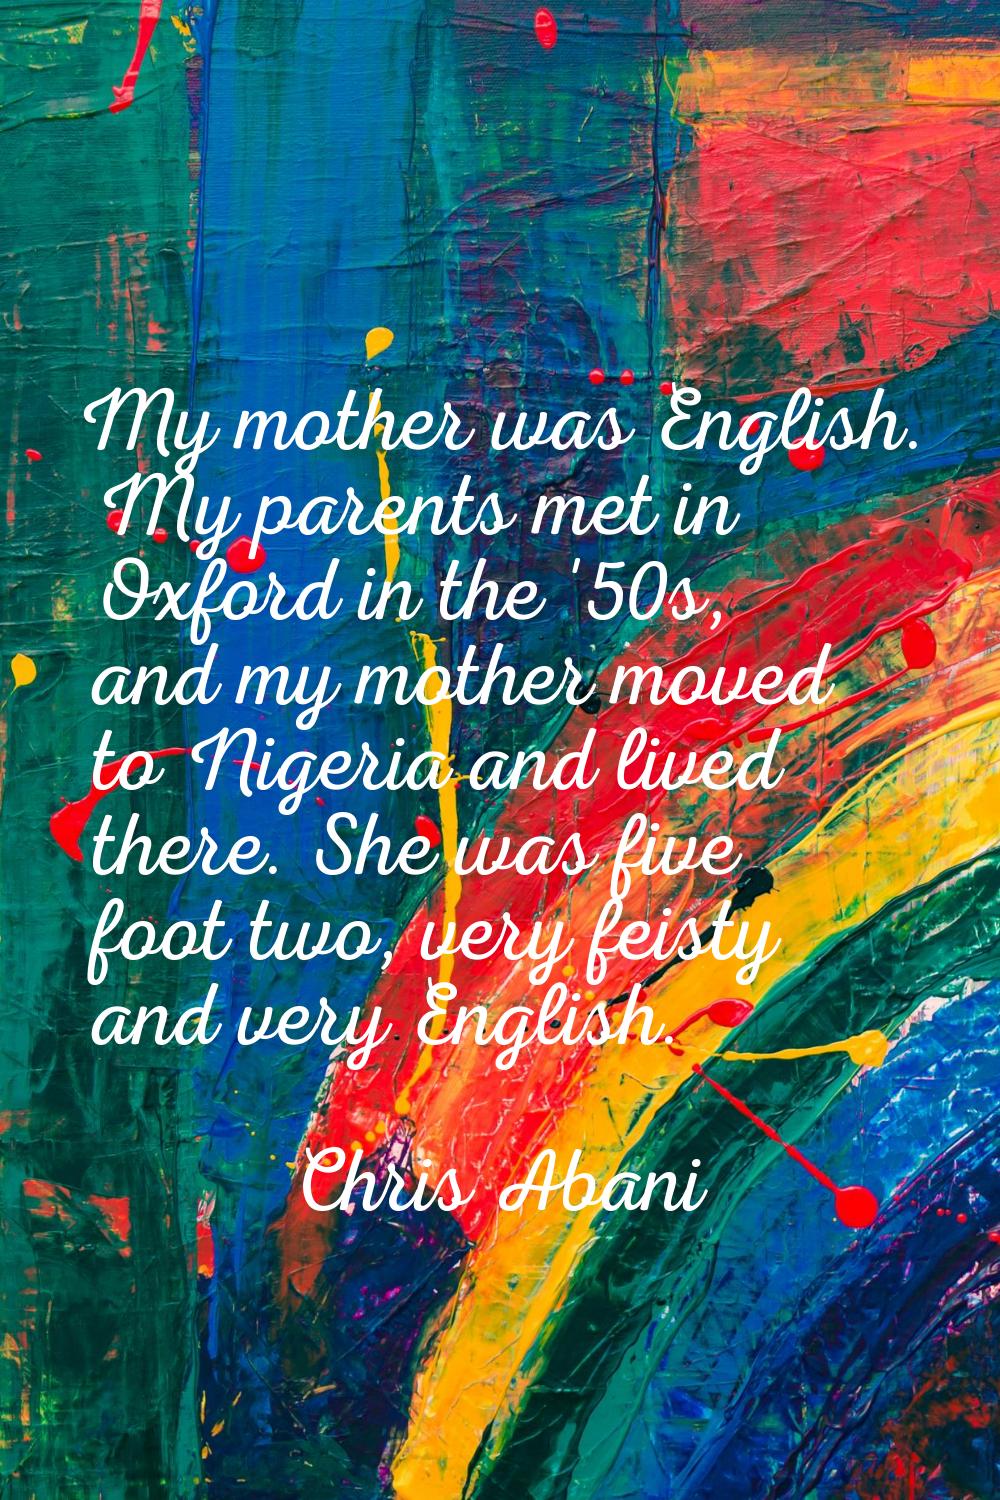 My mother was English. My parents met in Oxford in the '50s, and my mother moved to Nigeria and liv